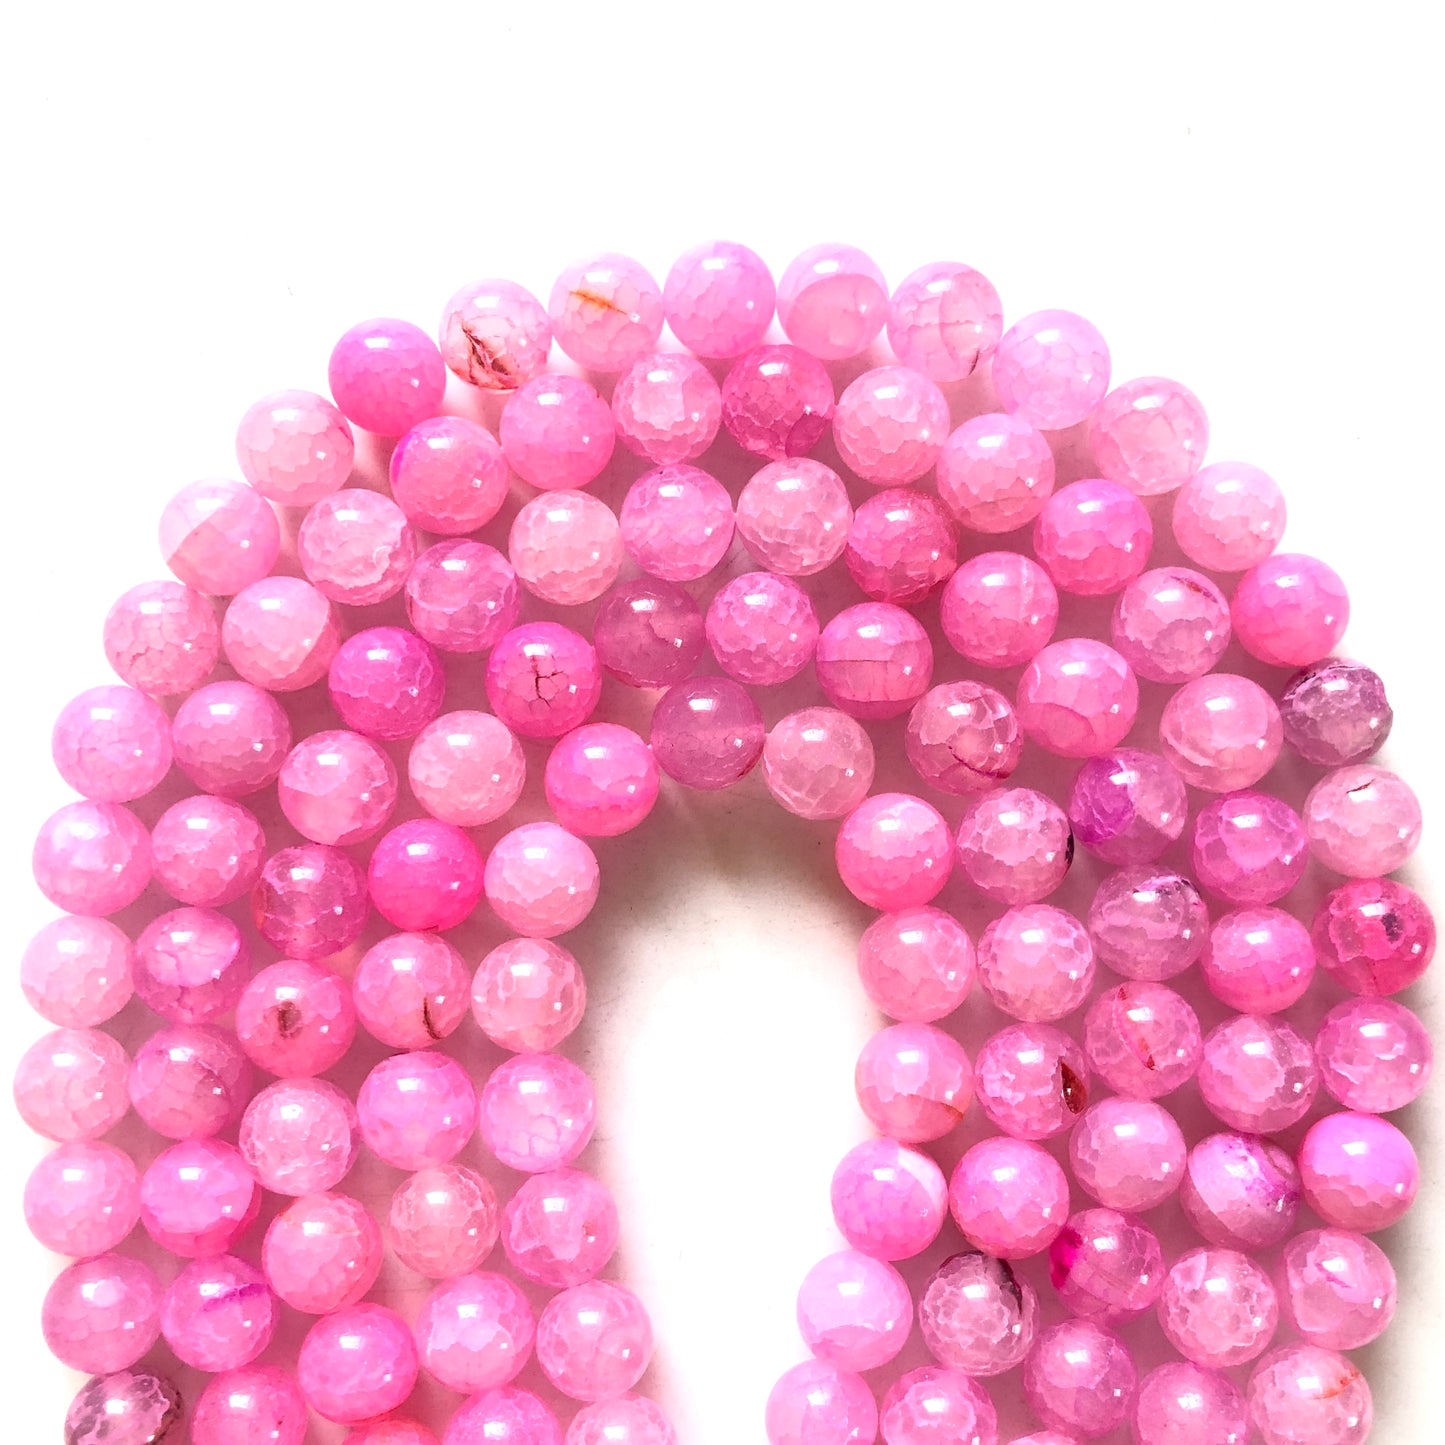 2 Strands/lot 10mm Pink Dragon Agate Round Stone Beads Stone Beads Breast Cancer Awareness Faceted Agate Beads Charms Beads Beyond